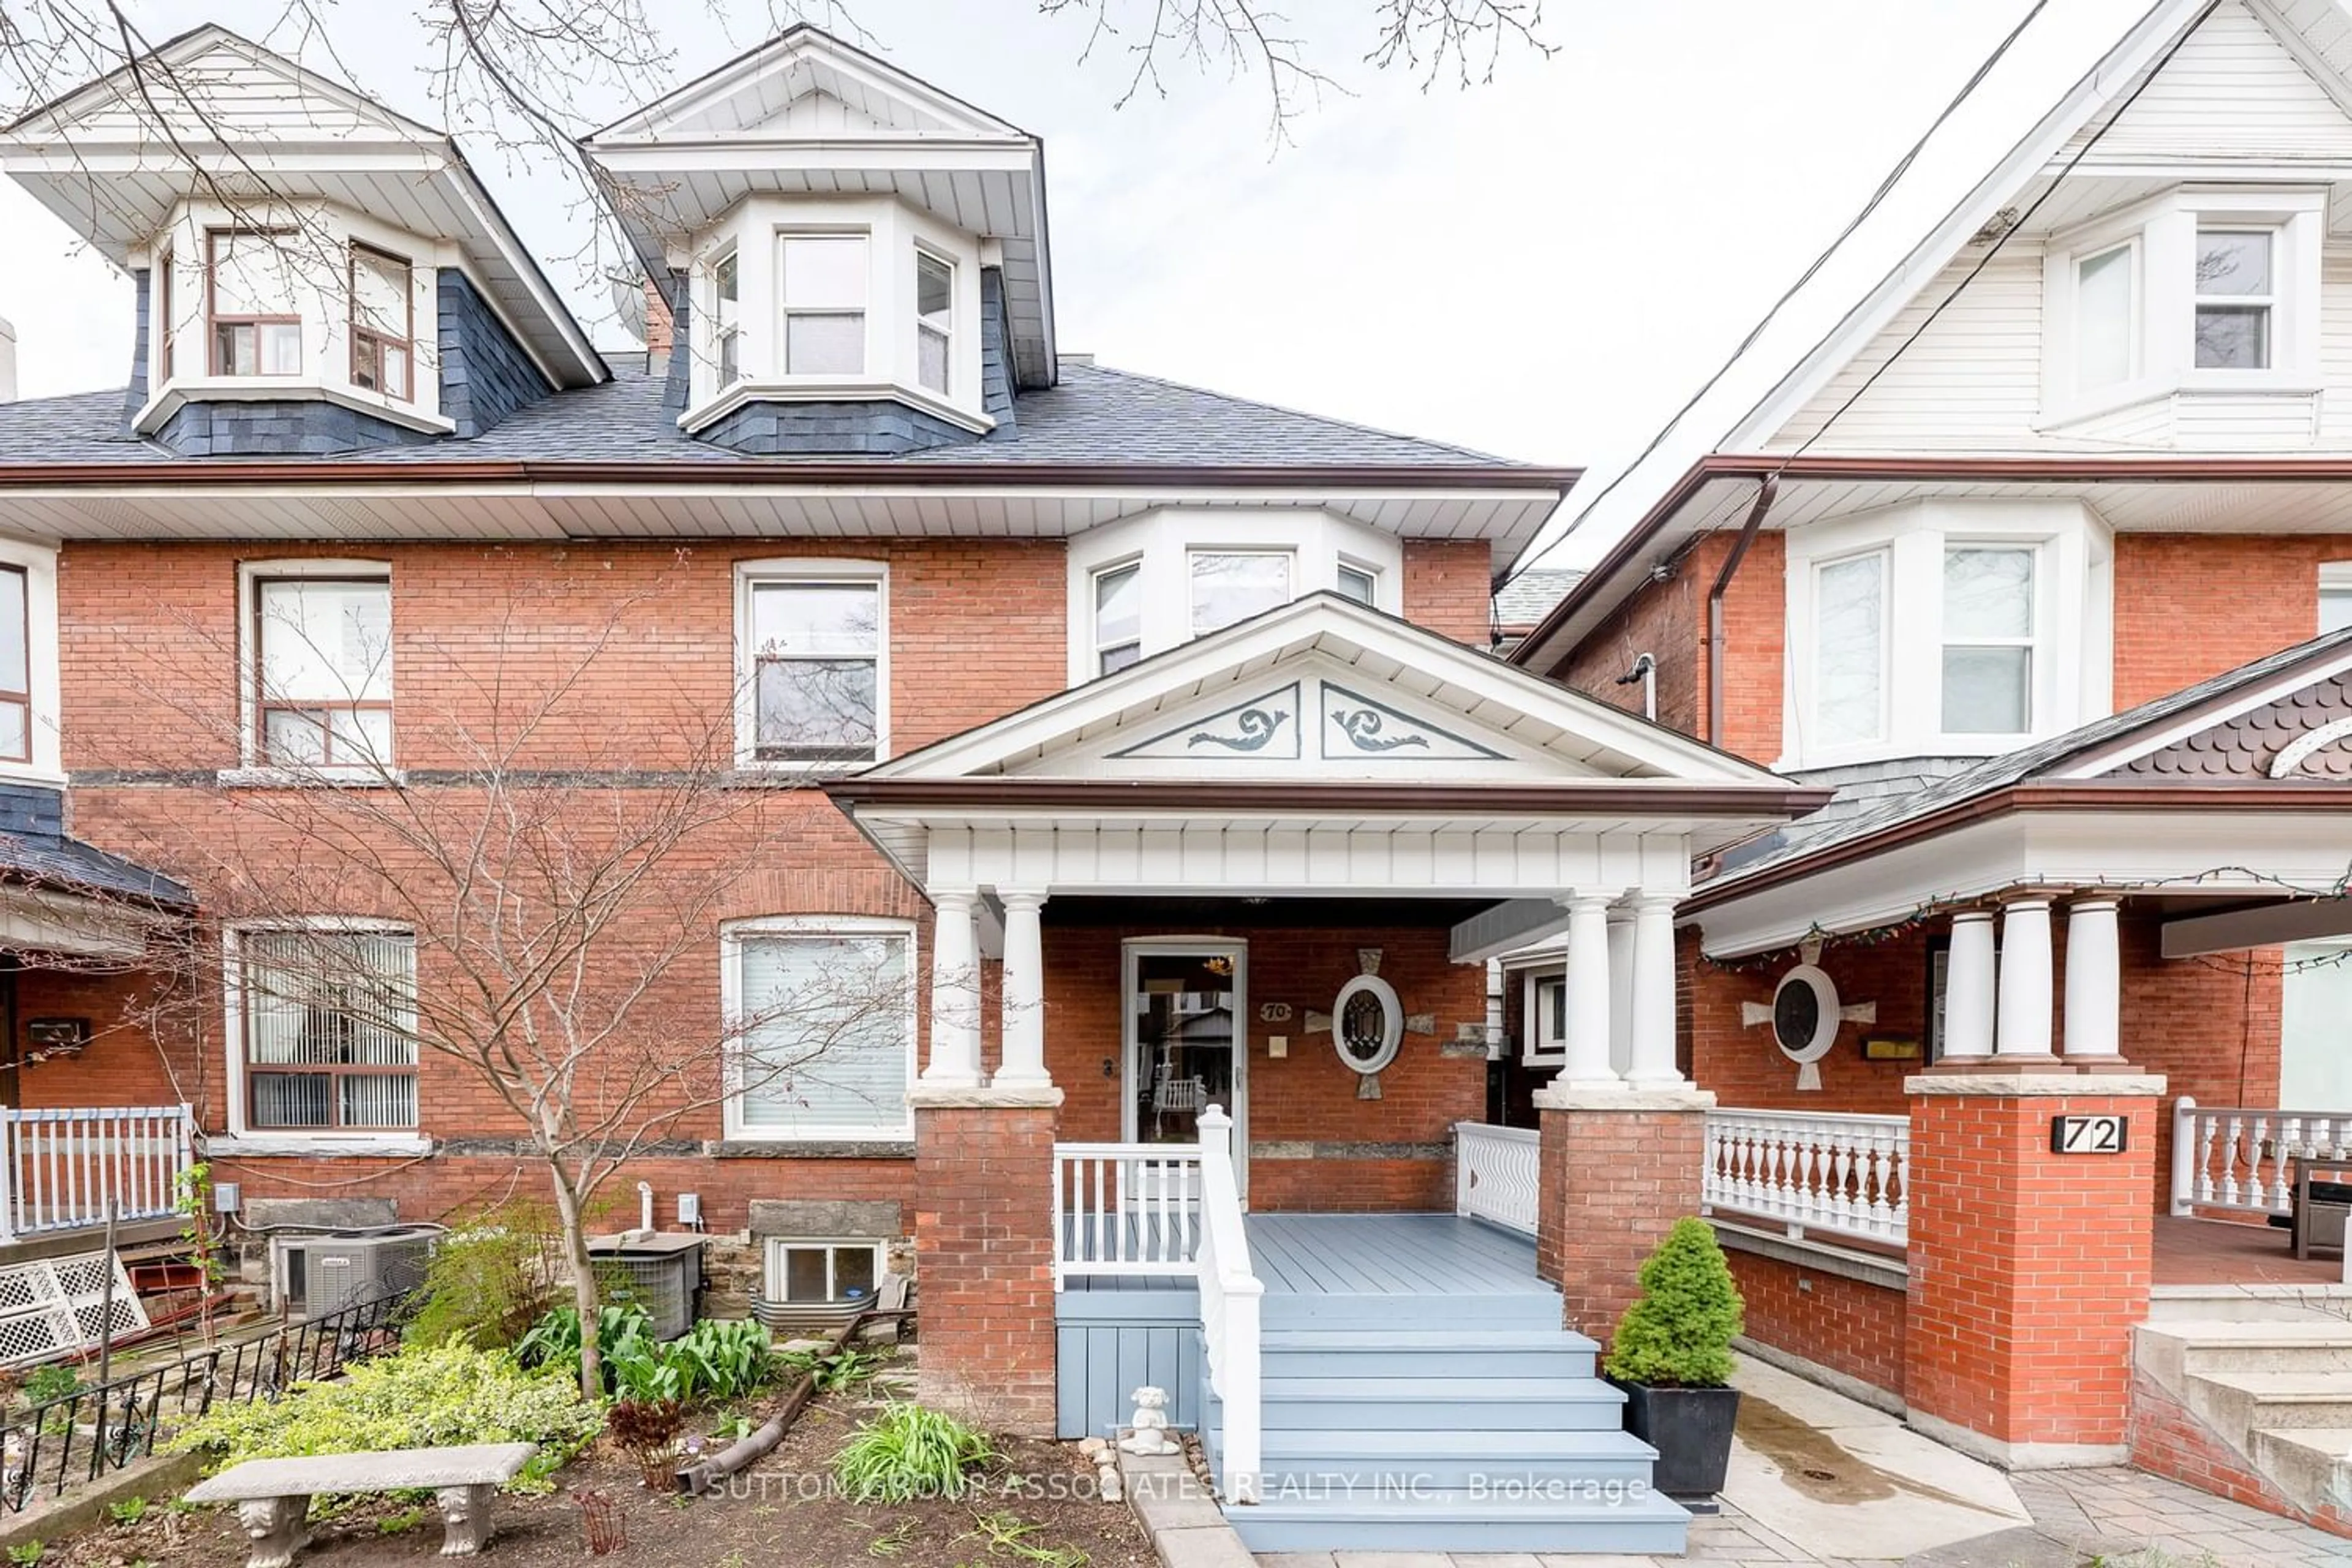 Home with brick exterior material for 70 Beatrice St, Toronto Ontario M6J 2T3